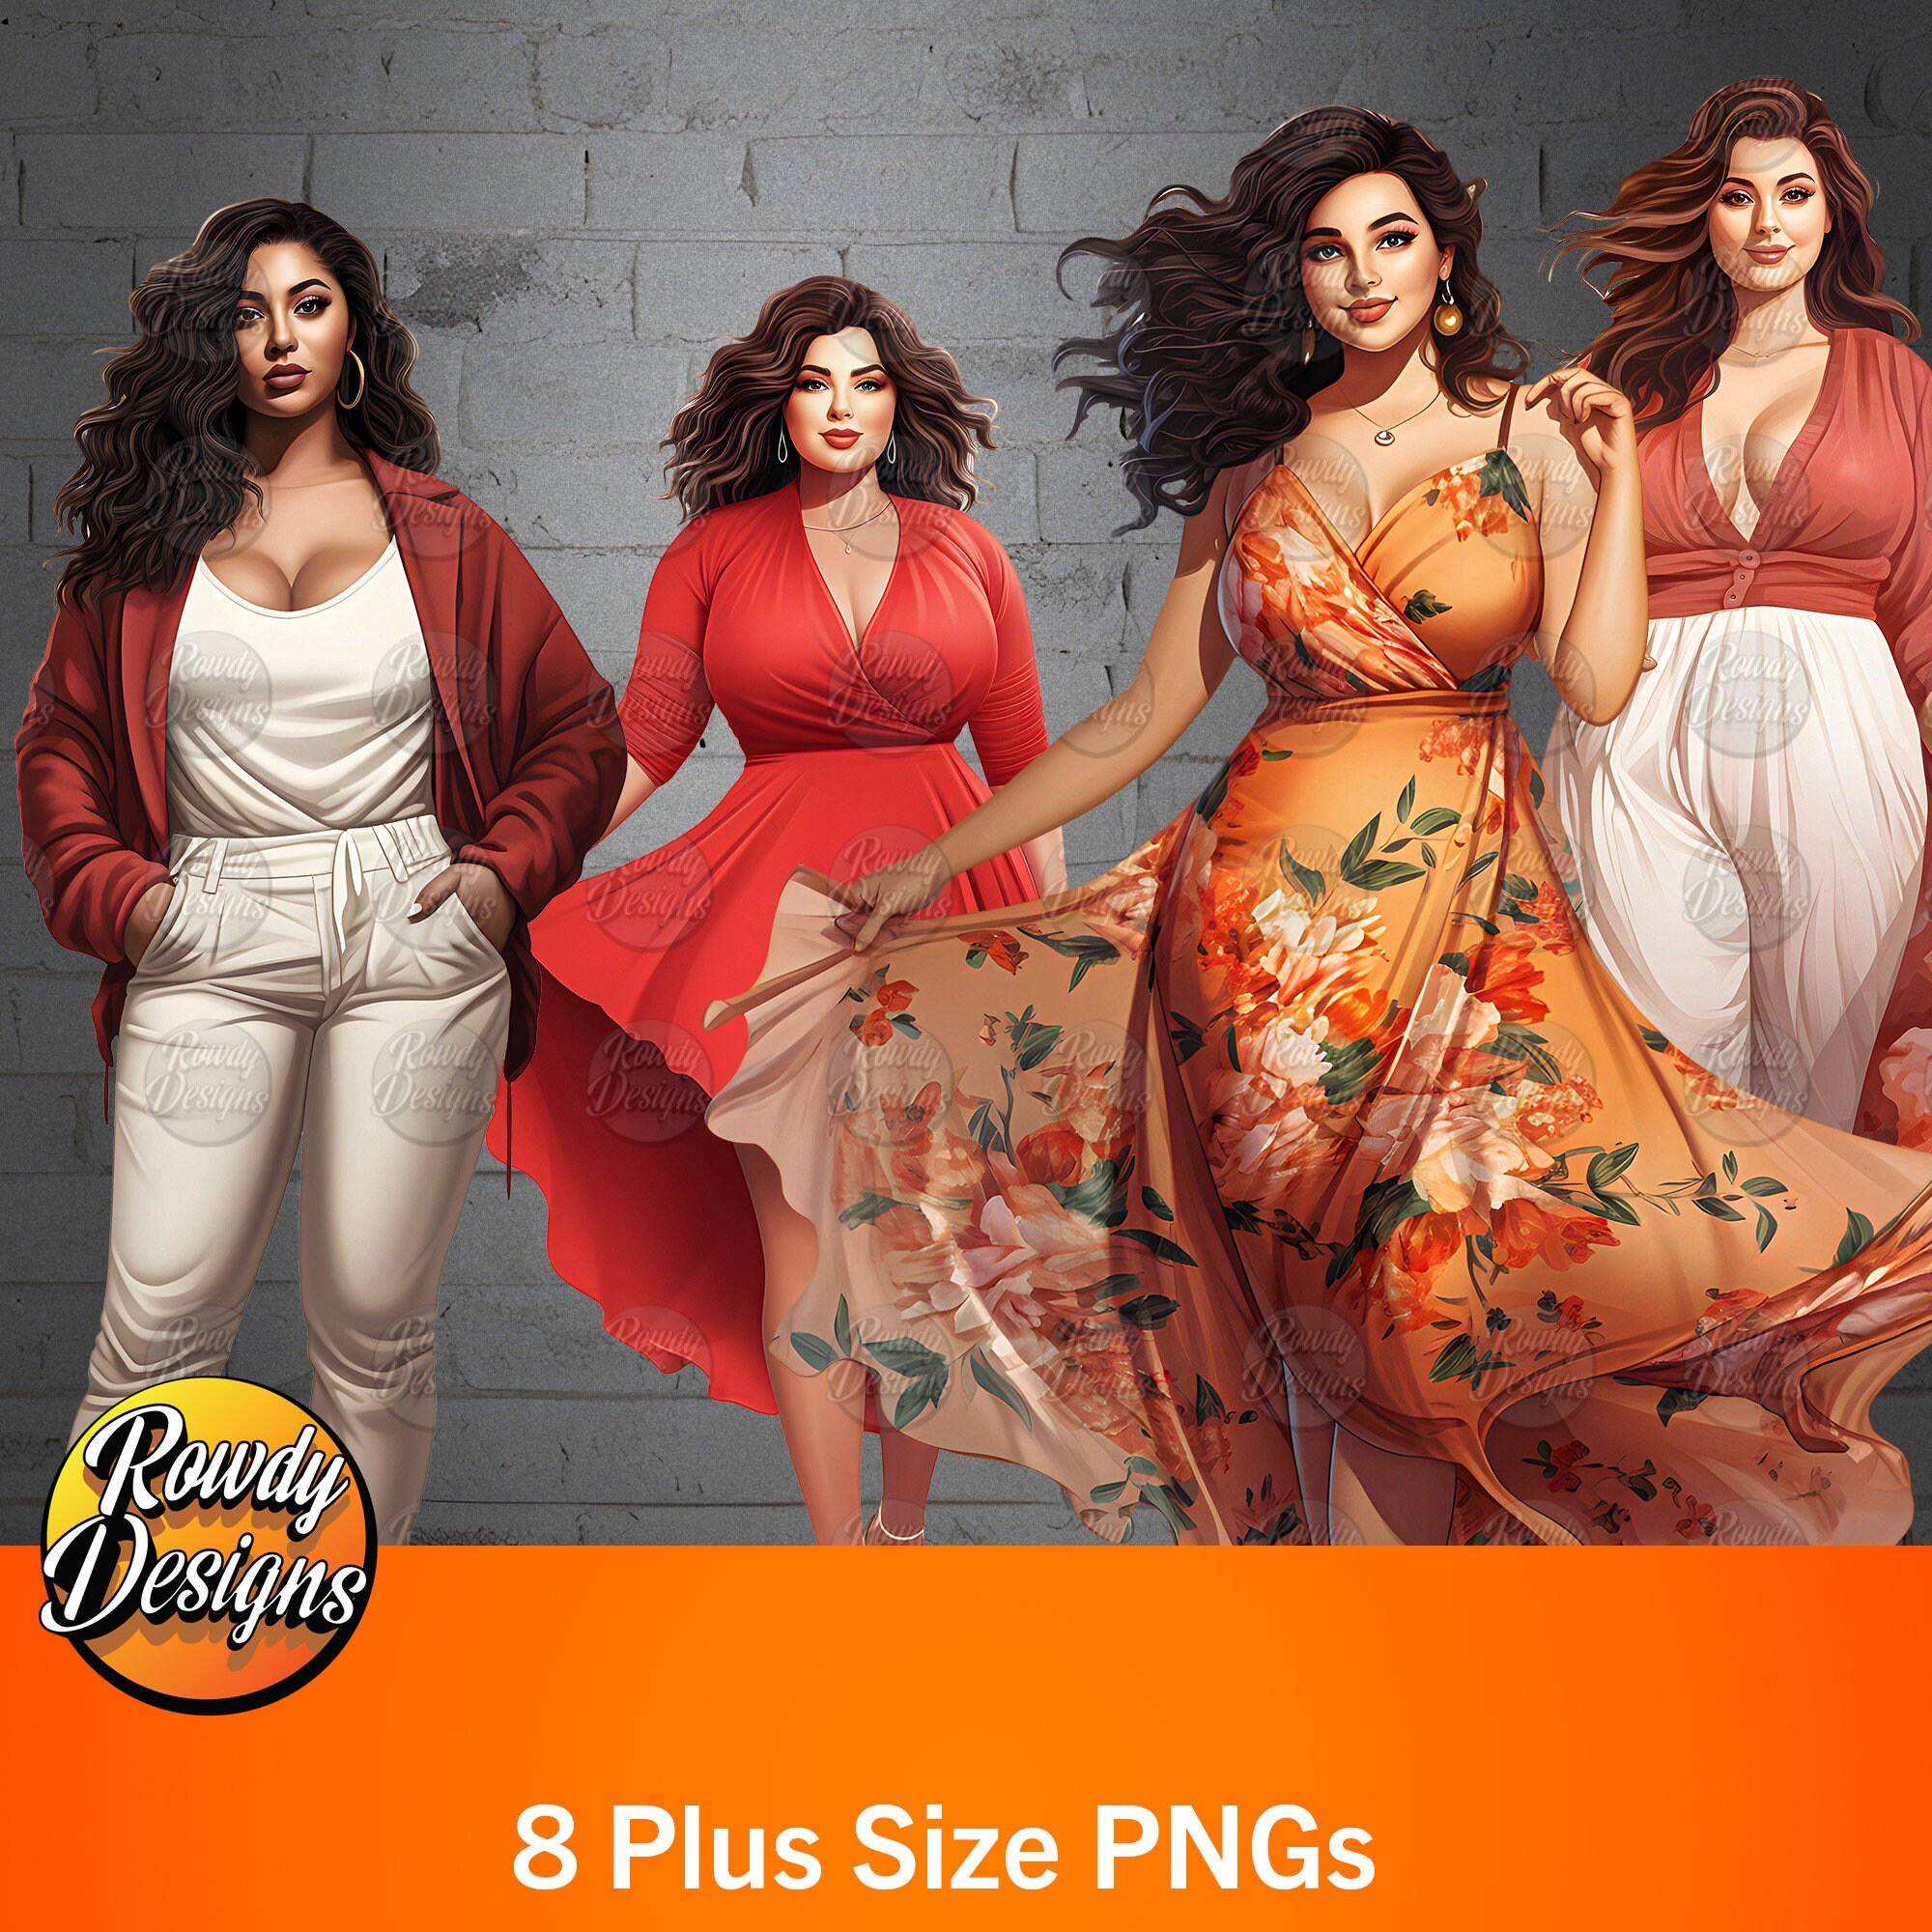 Images of Plus Size Body Shapes 